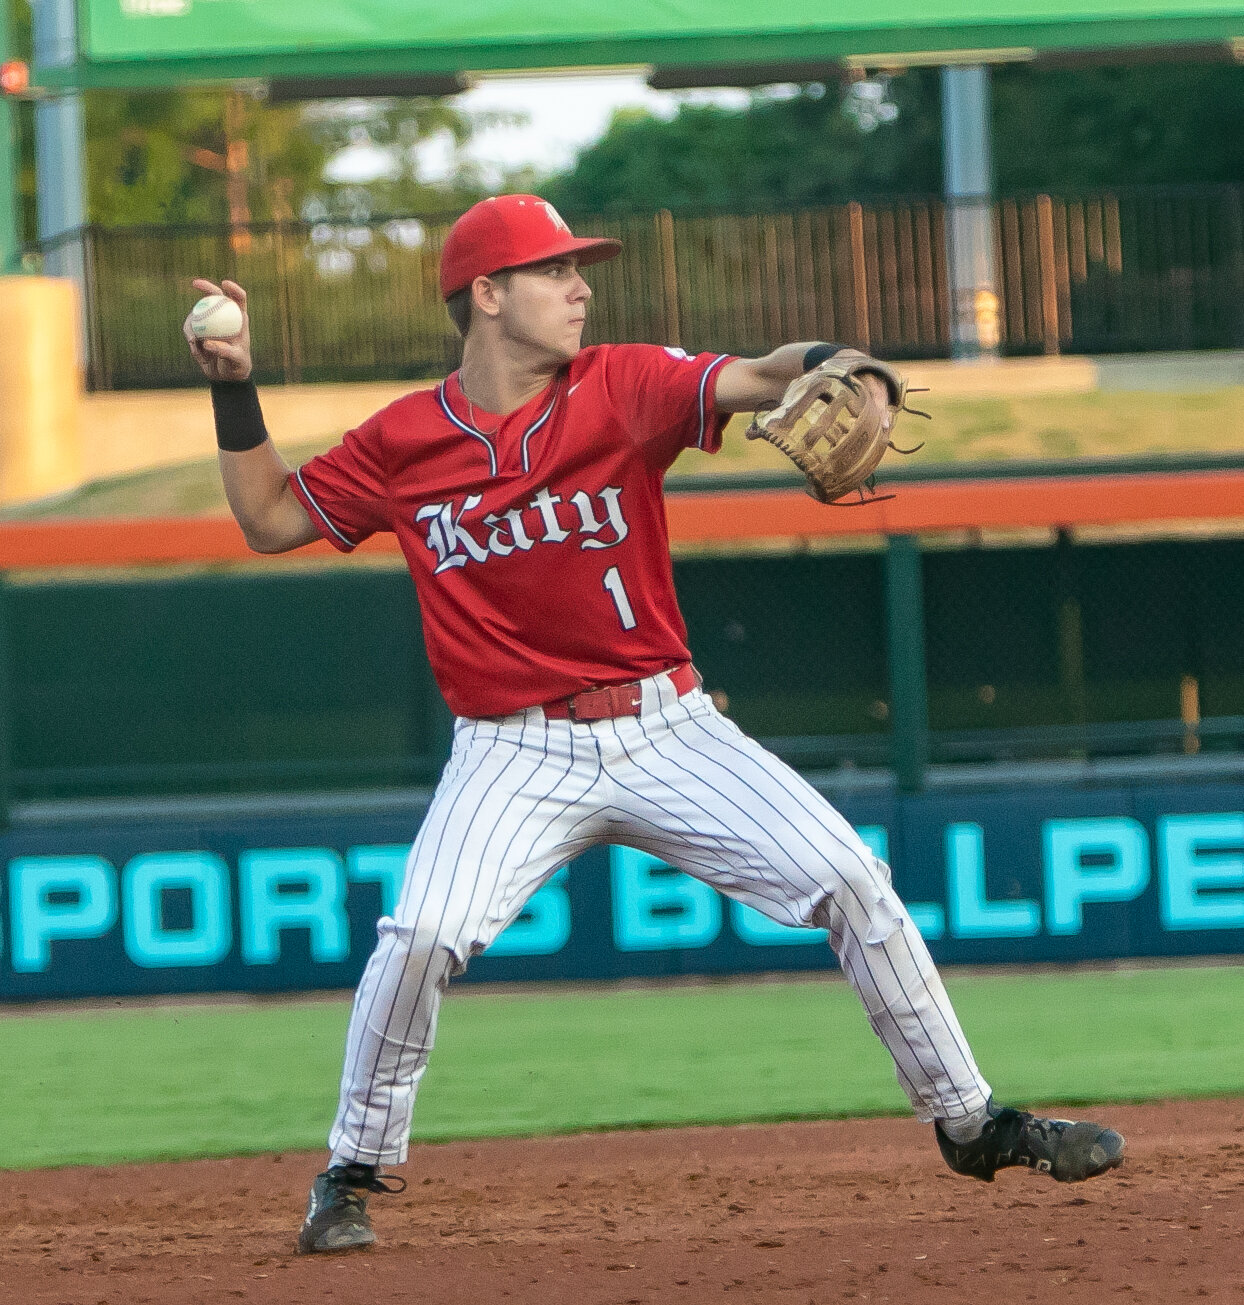 Graham Laxton throws to first base during Friday's Regional Final between Katy and Pearland at Constellation Field in Sugar Land.